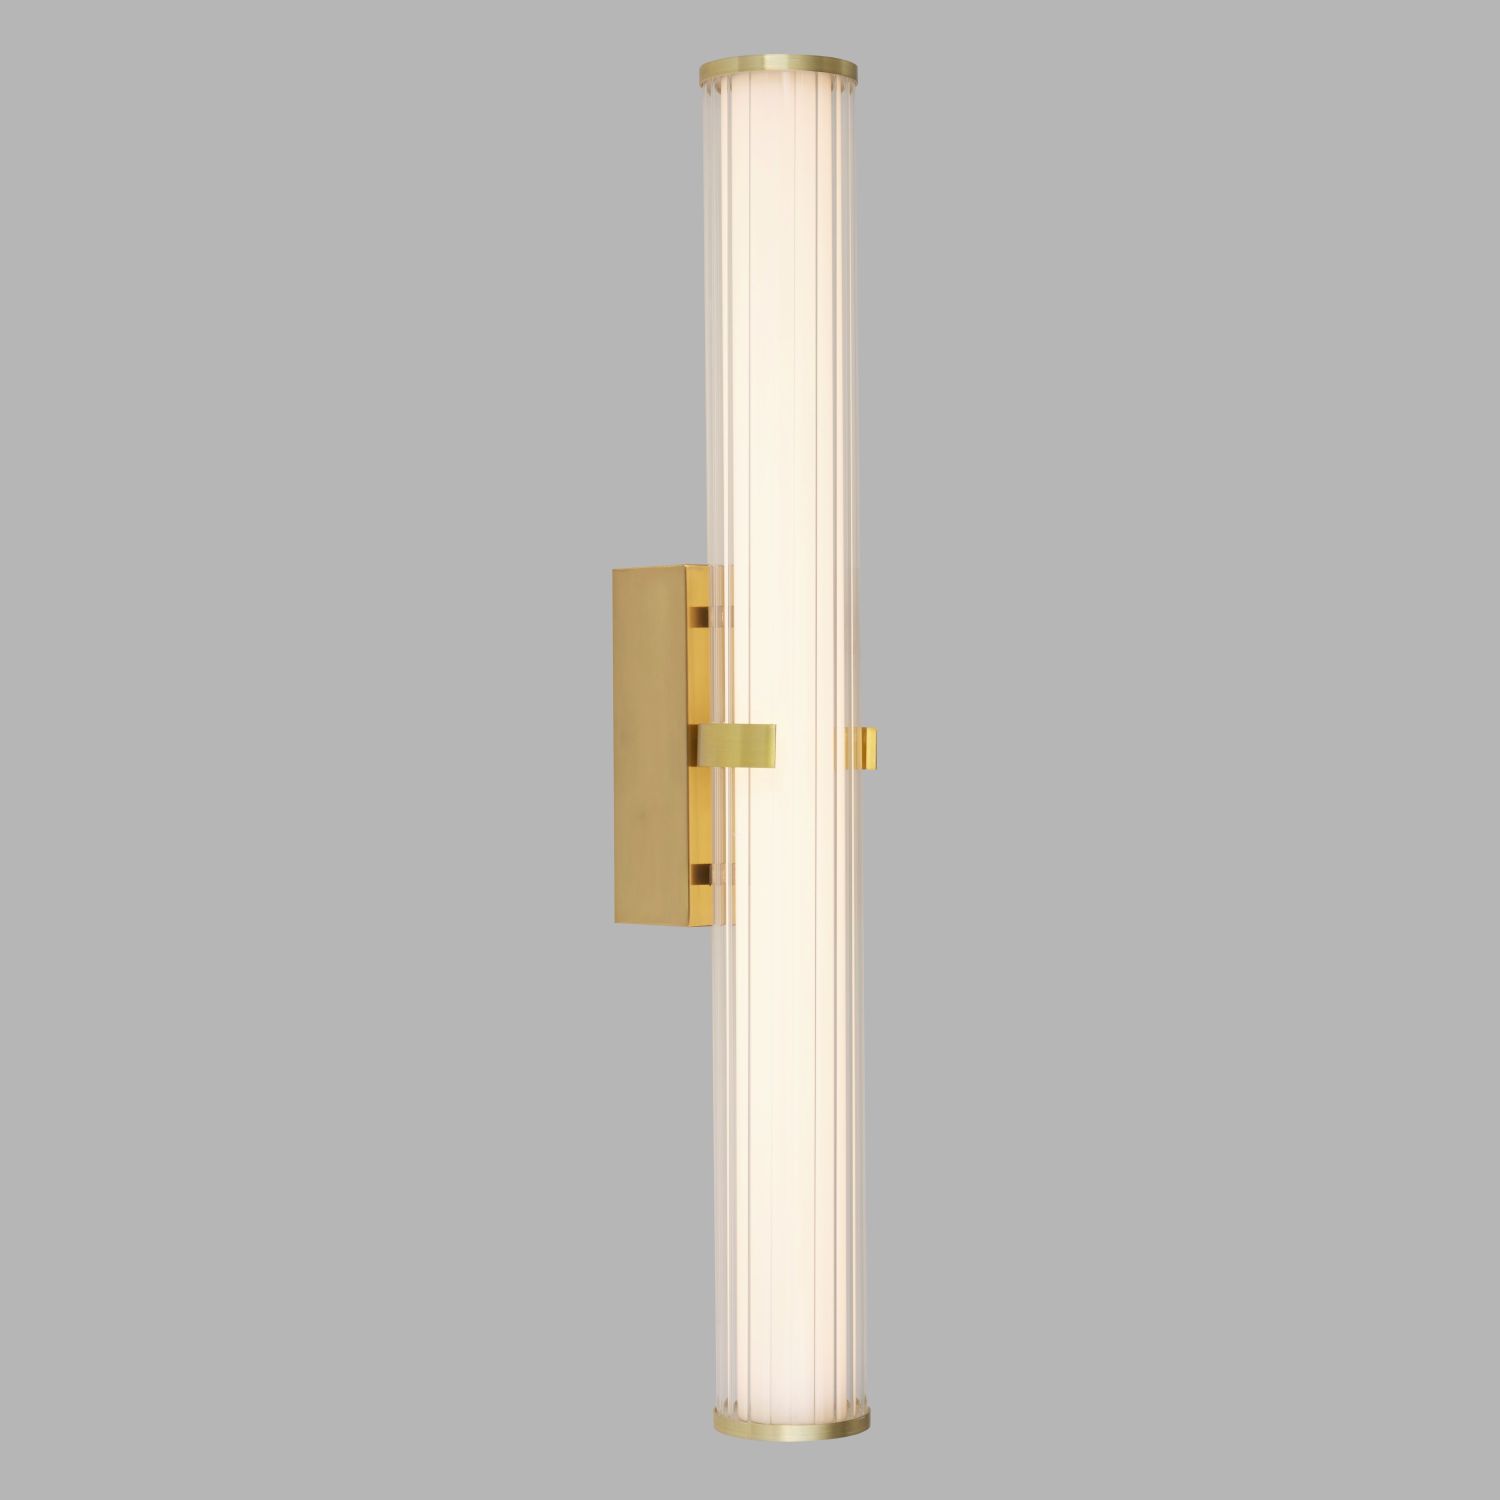 LED Wandleuchte Bad 63 cm IP44 Glas Metall in Gold